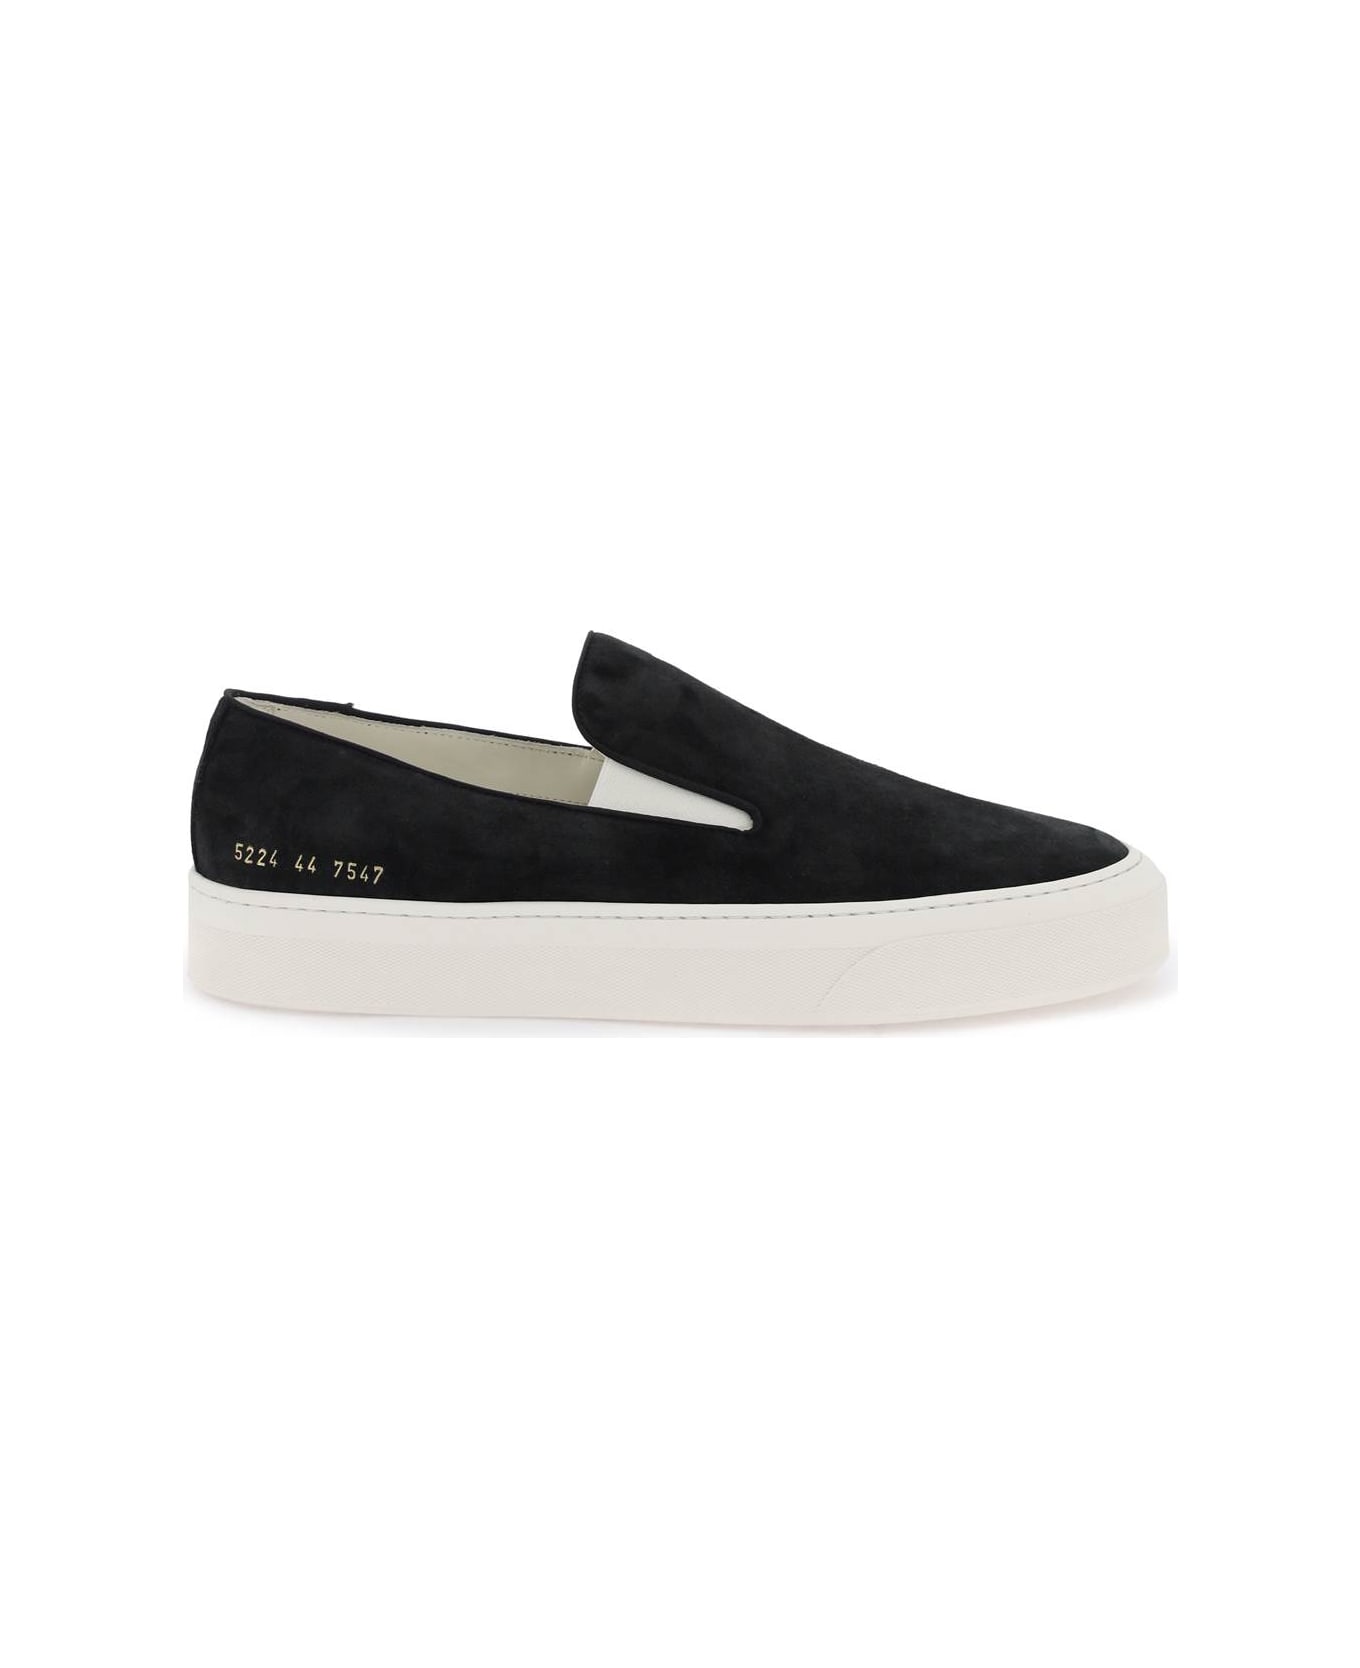 Common Projects Sneakers - BLACK (Black)